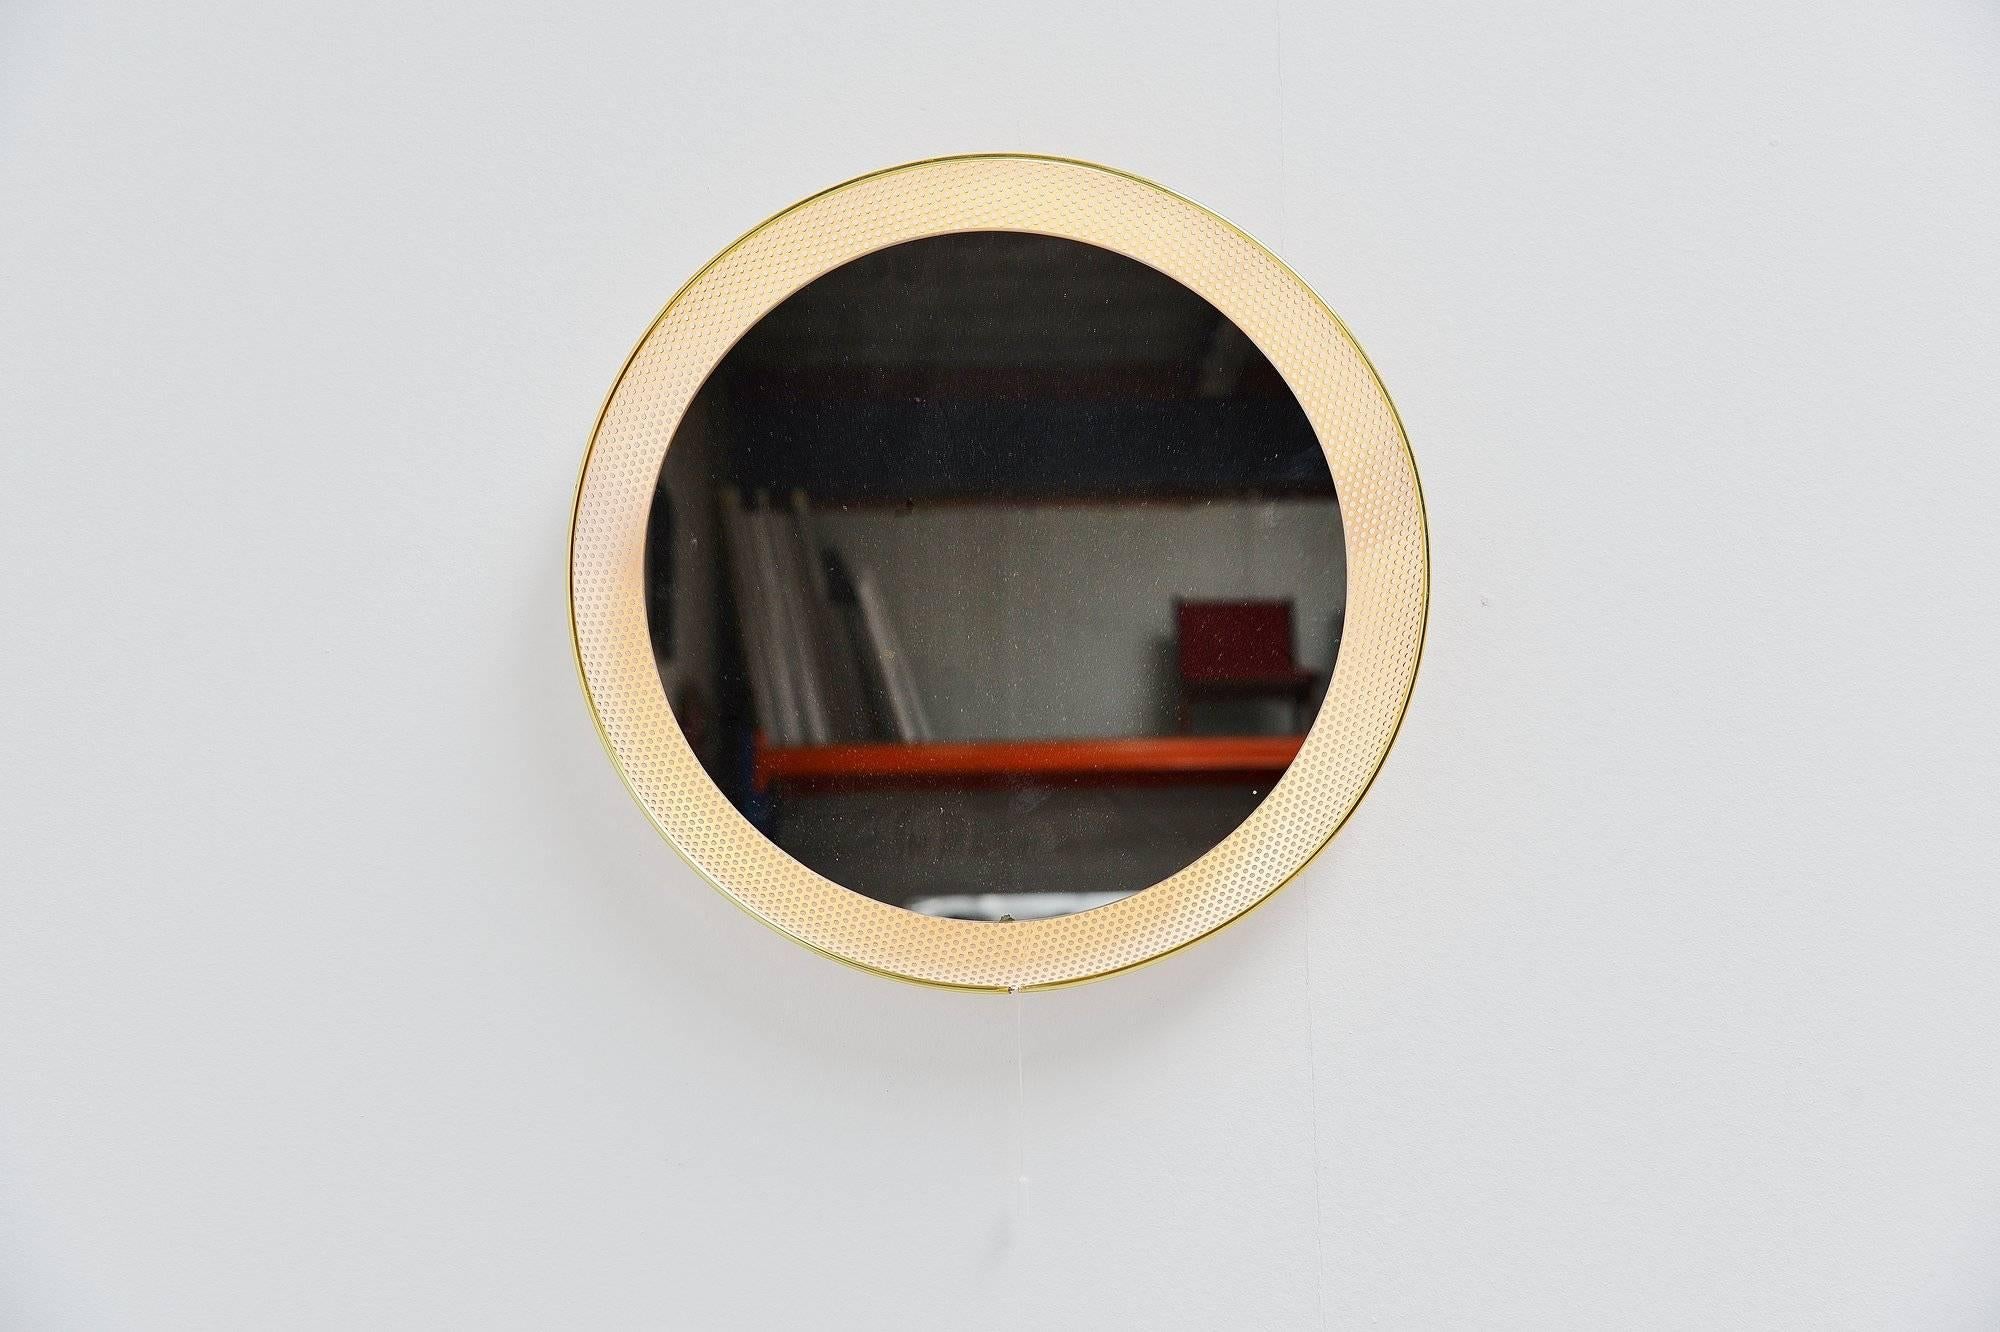 Very nice and decorative round illuminated wall mirror designed by Floris Fiedeldij made by Artimeta Soest, Holland, 1960. These mirrors are often sold or attributed as Mathieu Mategot mirrors. This is a white painted mirror, fully die cut back.